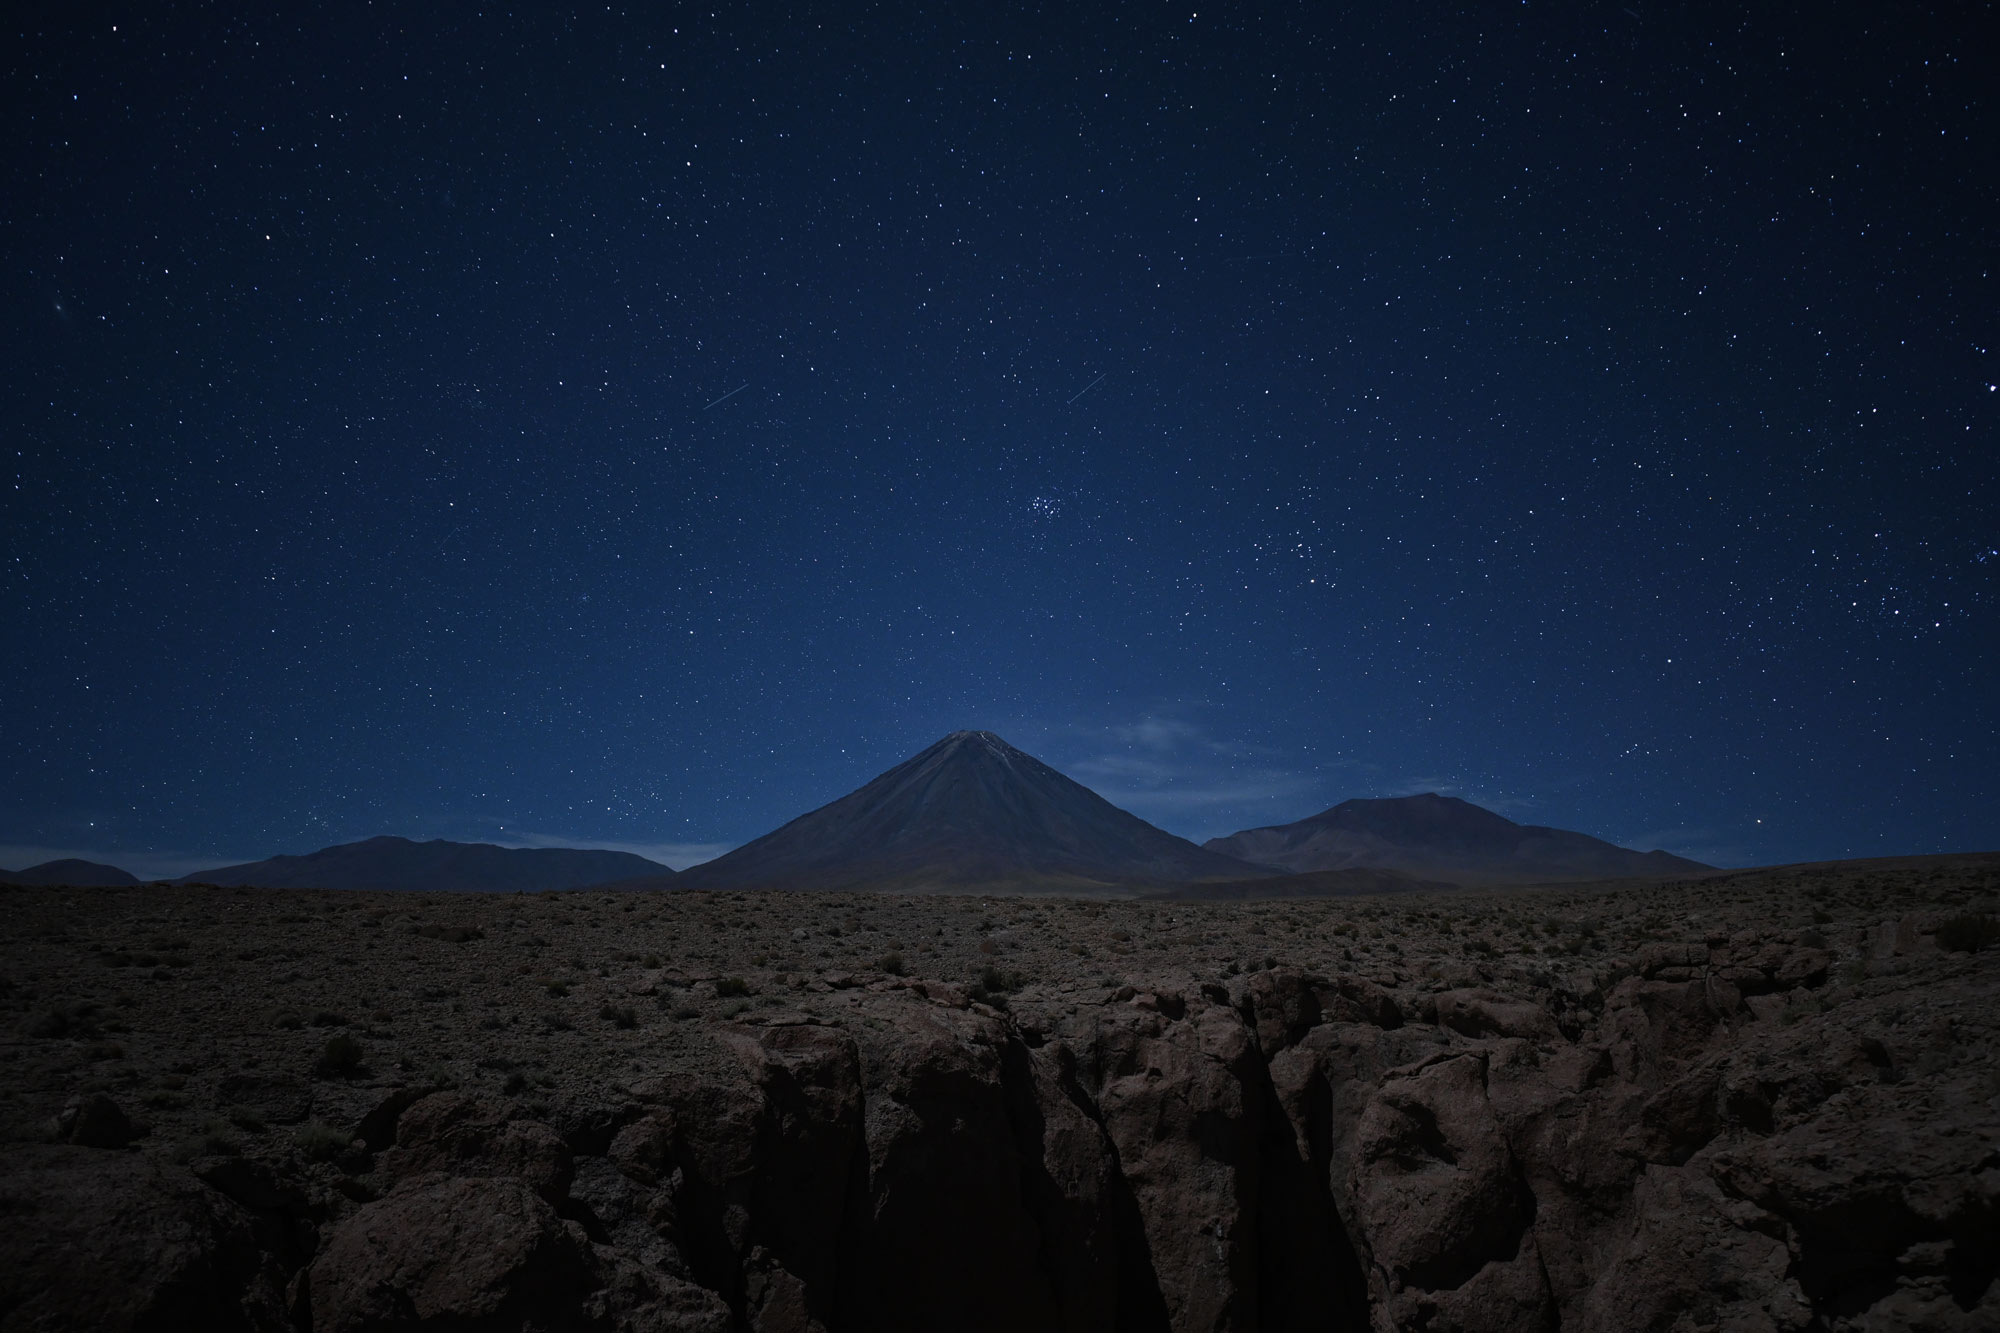 Night photo of a landscape under the stars, taken with the NIKKOR Z 20mm f/1.8 S